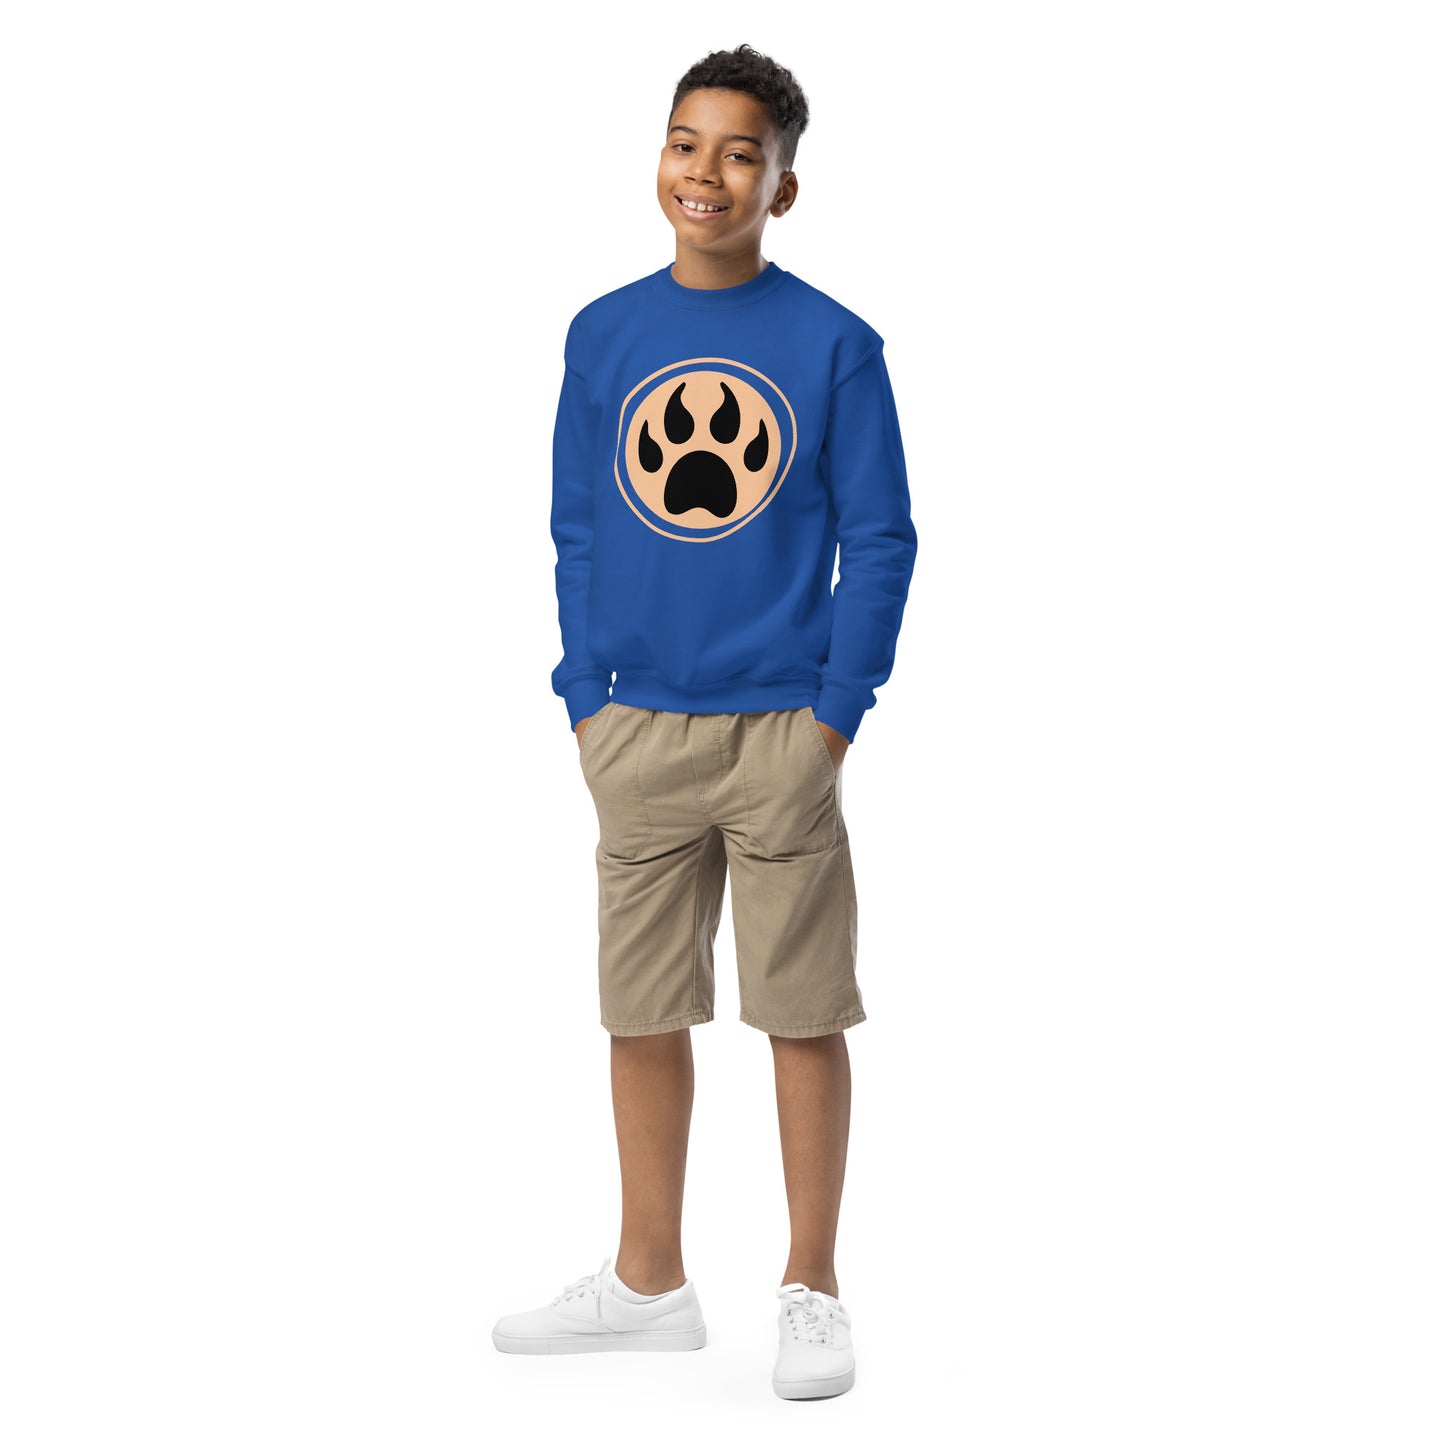 Youth with royal blue sweatshirt and a print of a wolf claw